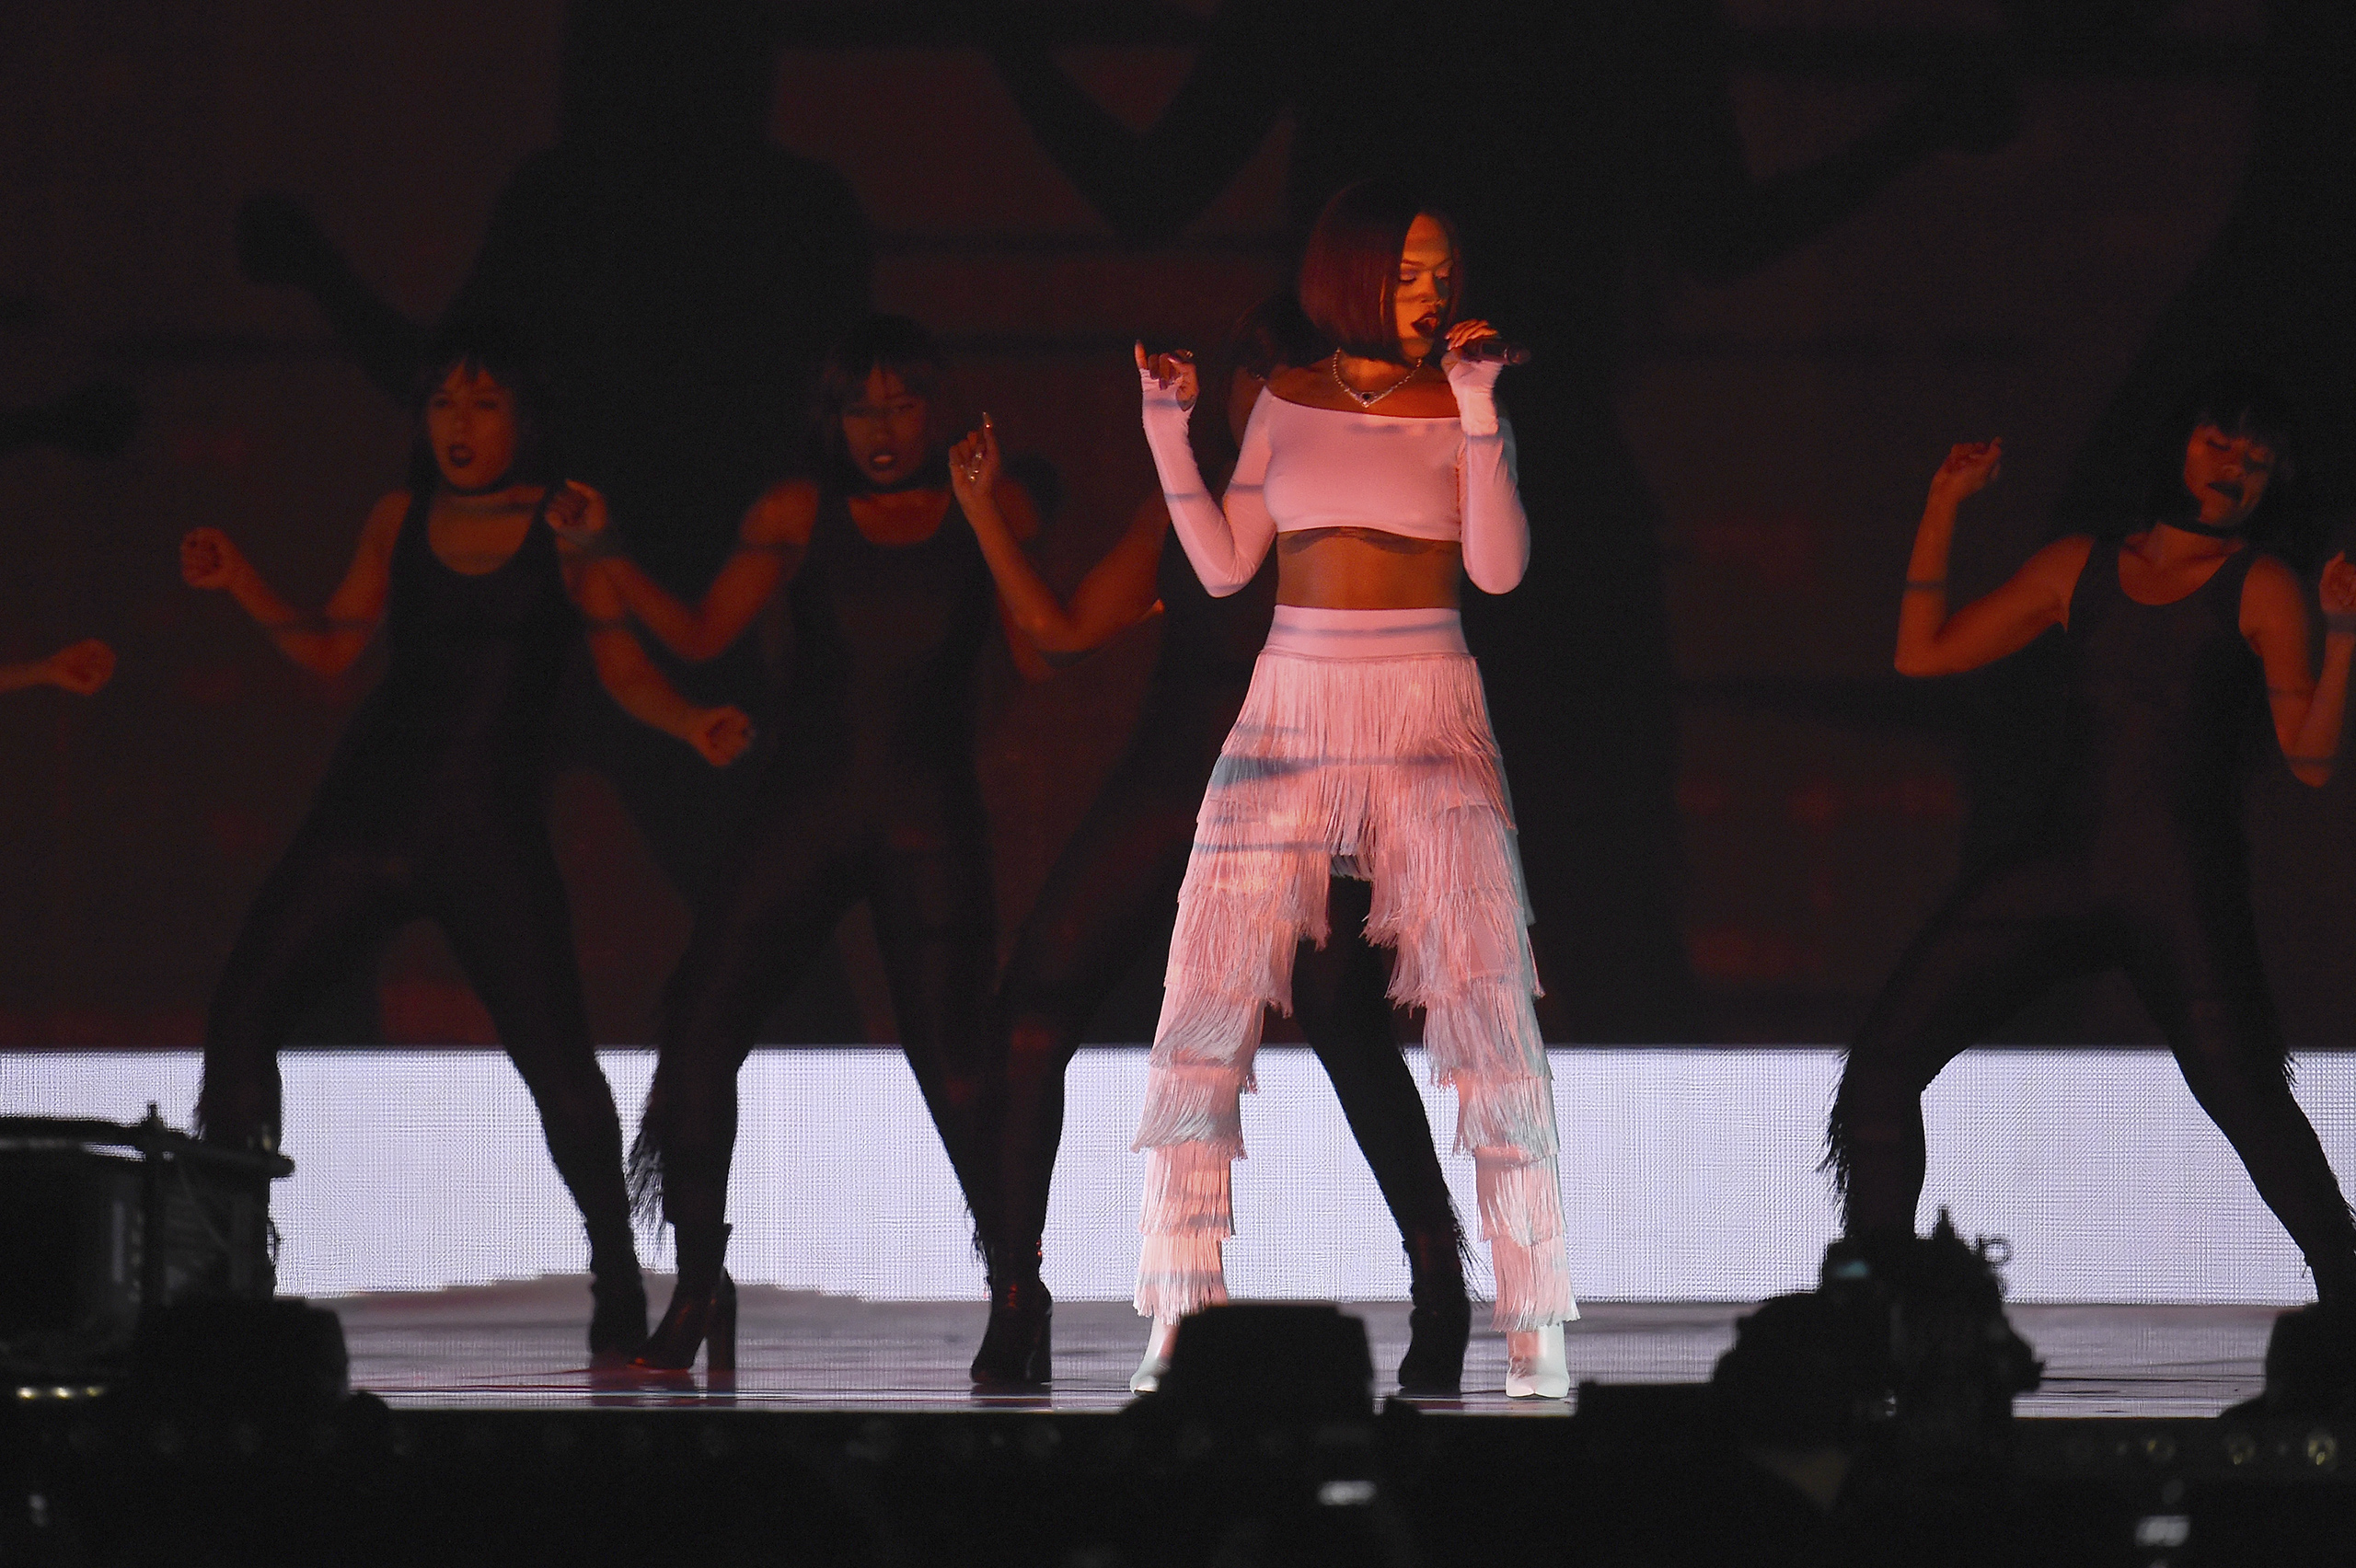 Rihanna performs onstage at the BRIT Awards at The O2 Arena in London, Feb. 24, 2016. (Ian Gavan—Getty Images)